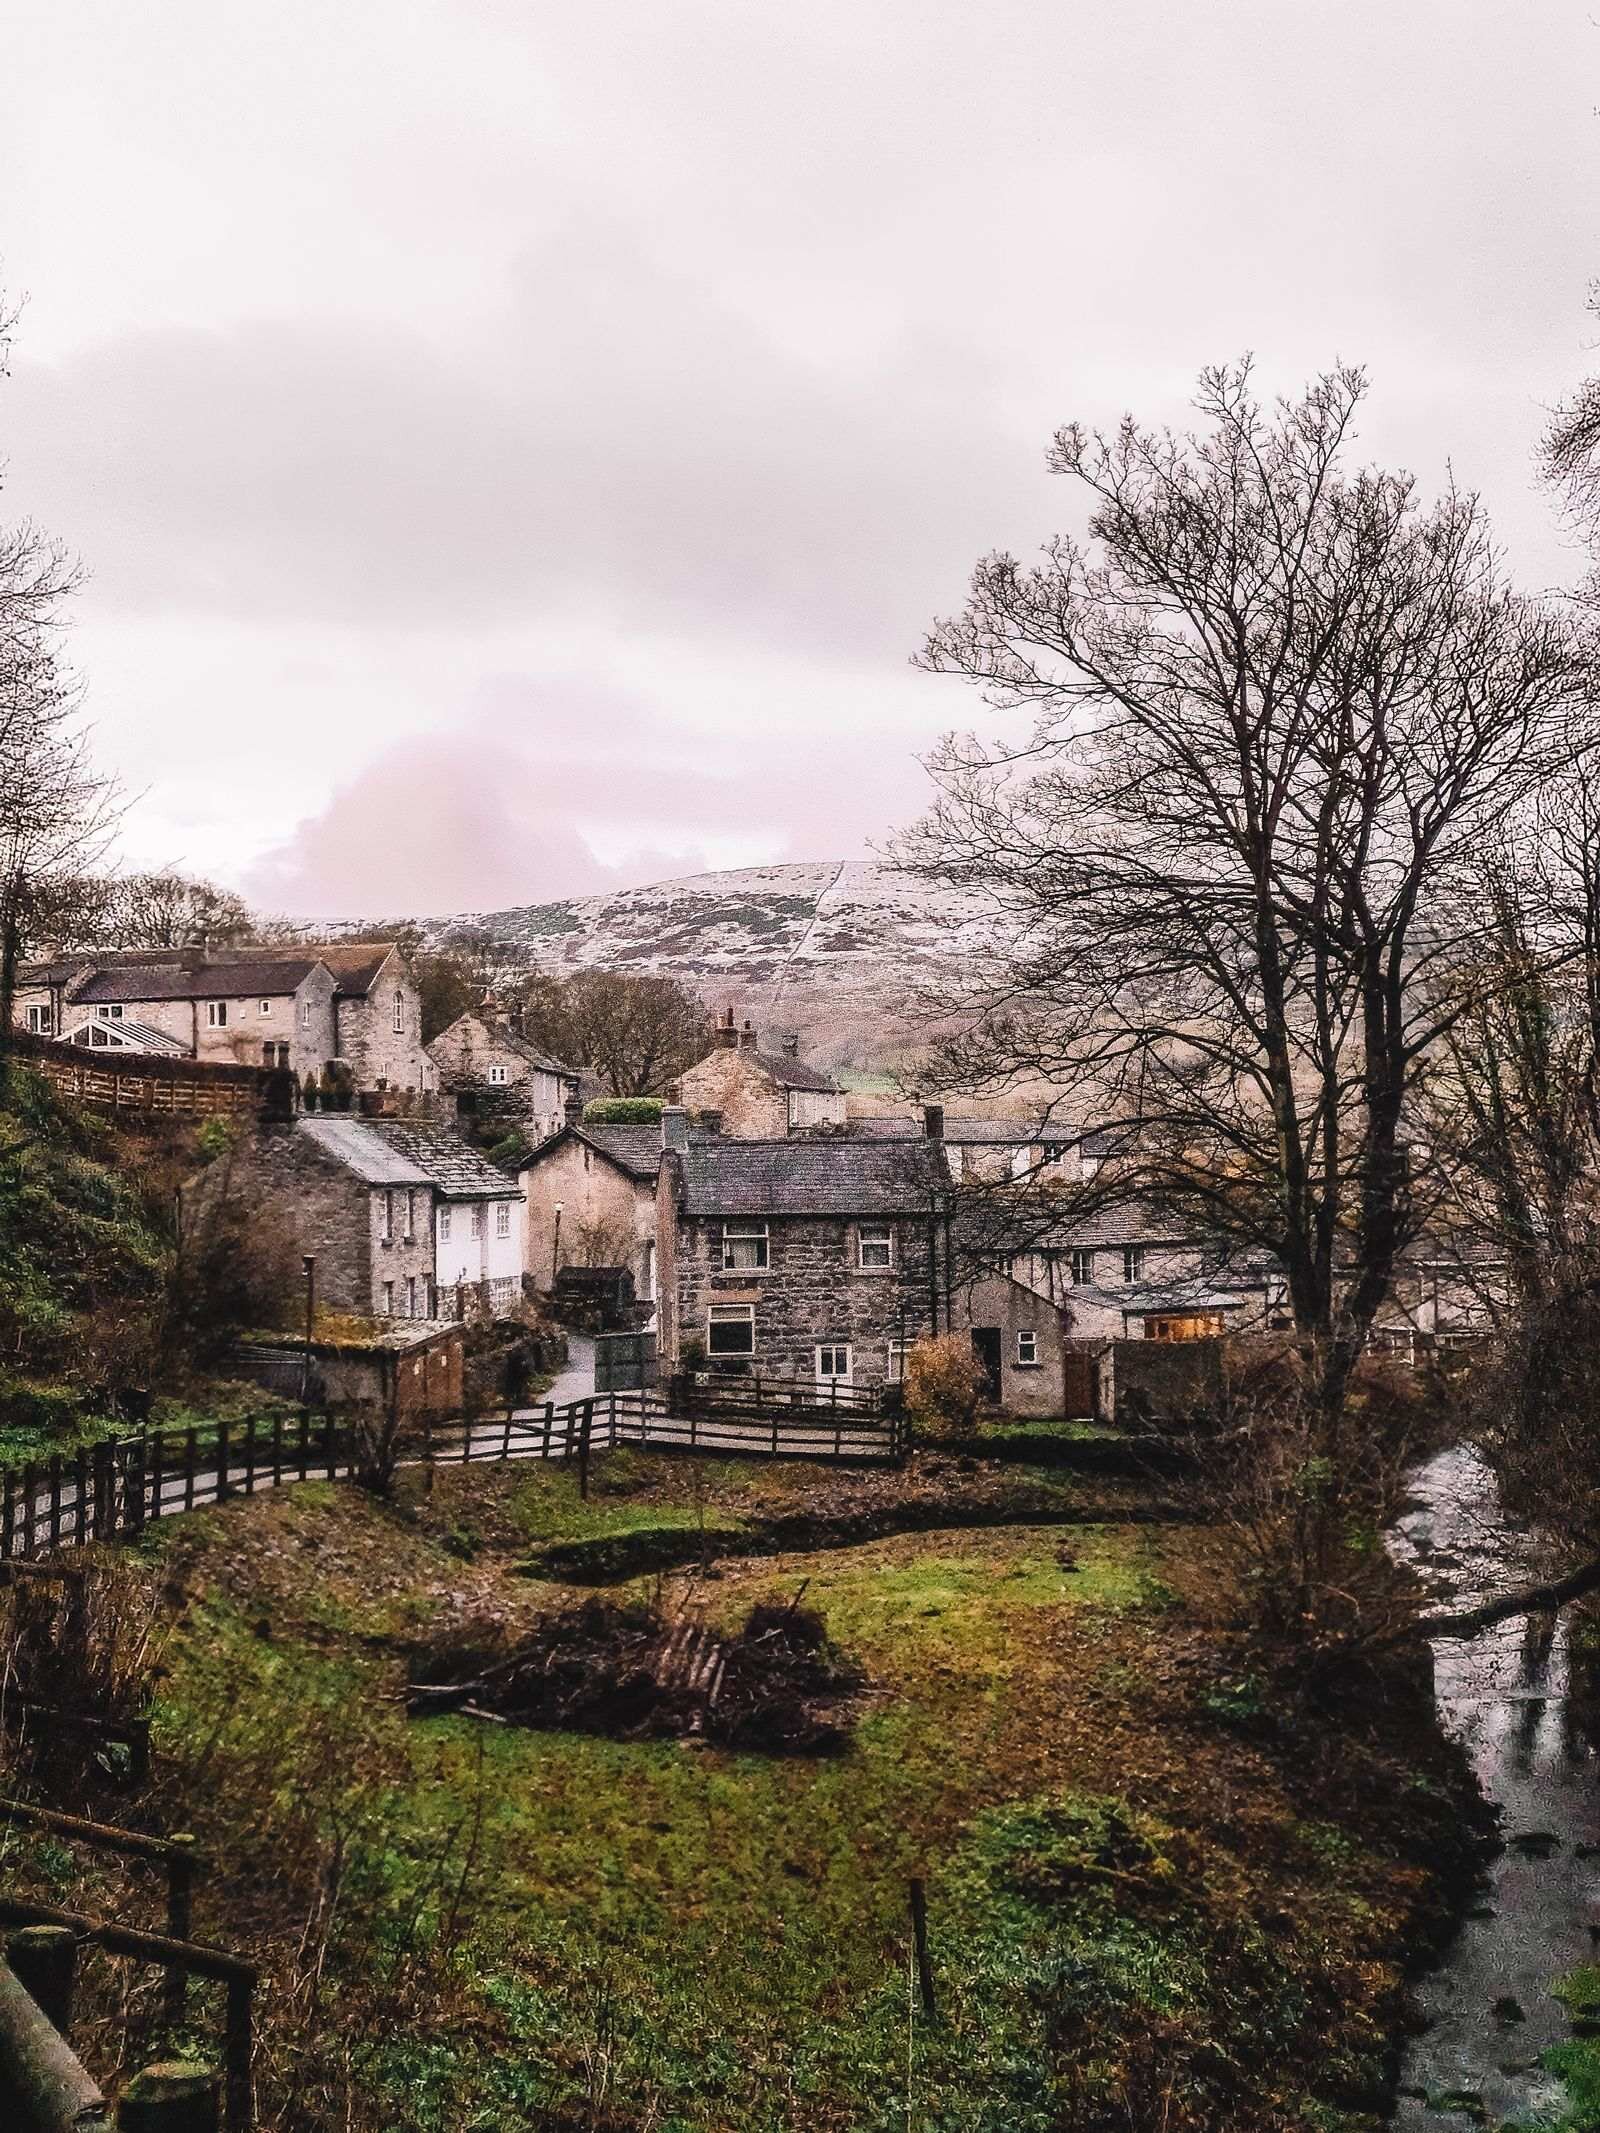 View of Castleton at the entrance of Peak Cavern